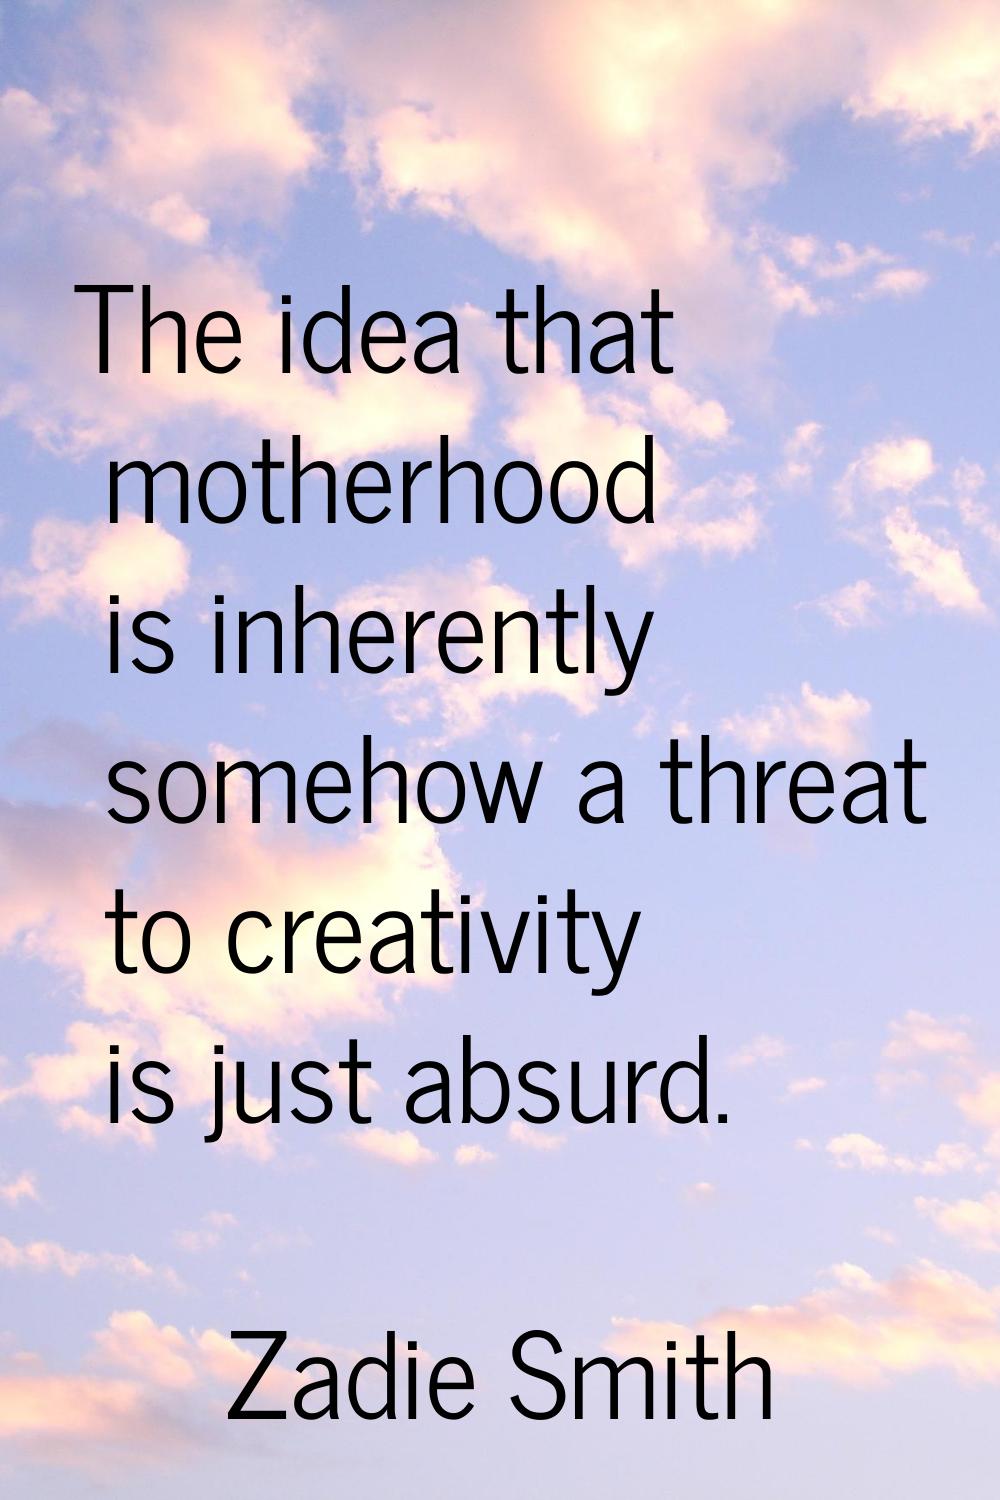 The idea that motherhood is inherently somehow a threat to creativity is just absurd.